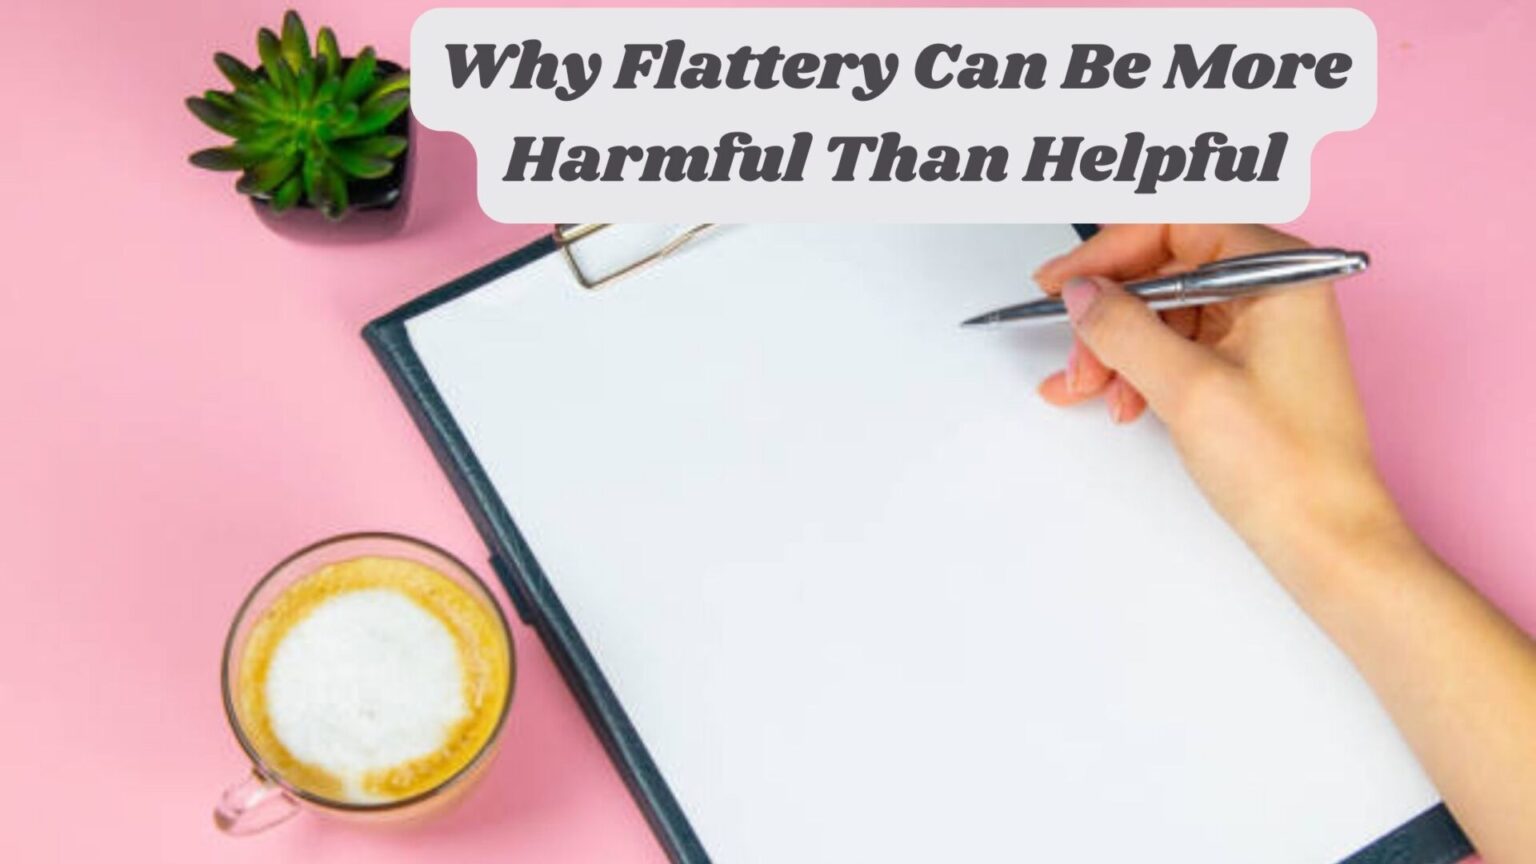 Why Flattery Can Be More Harmful Than Helpful